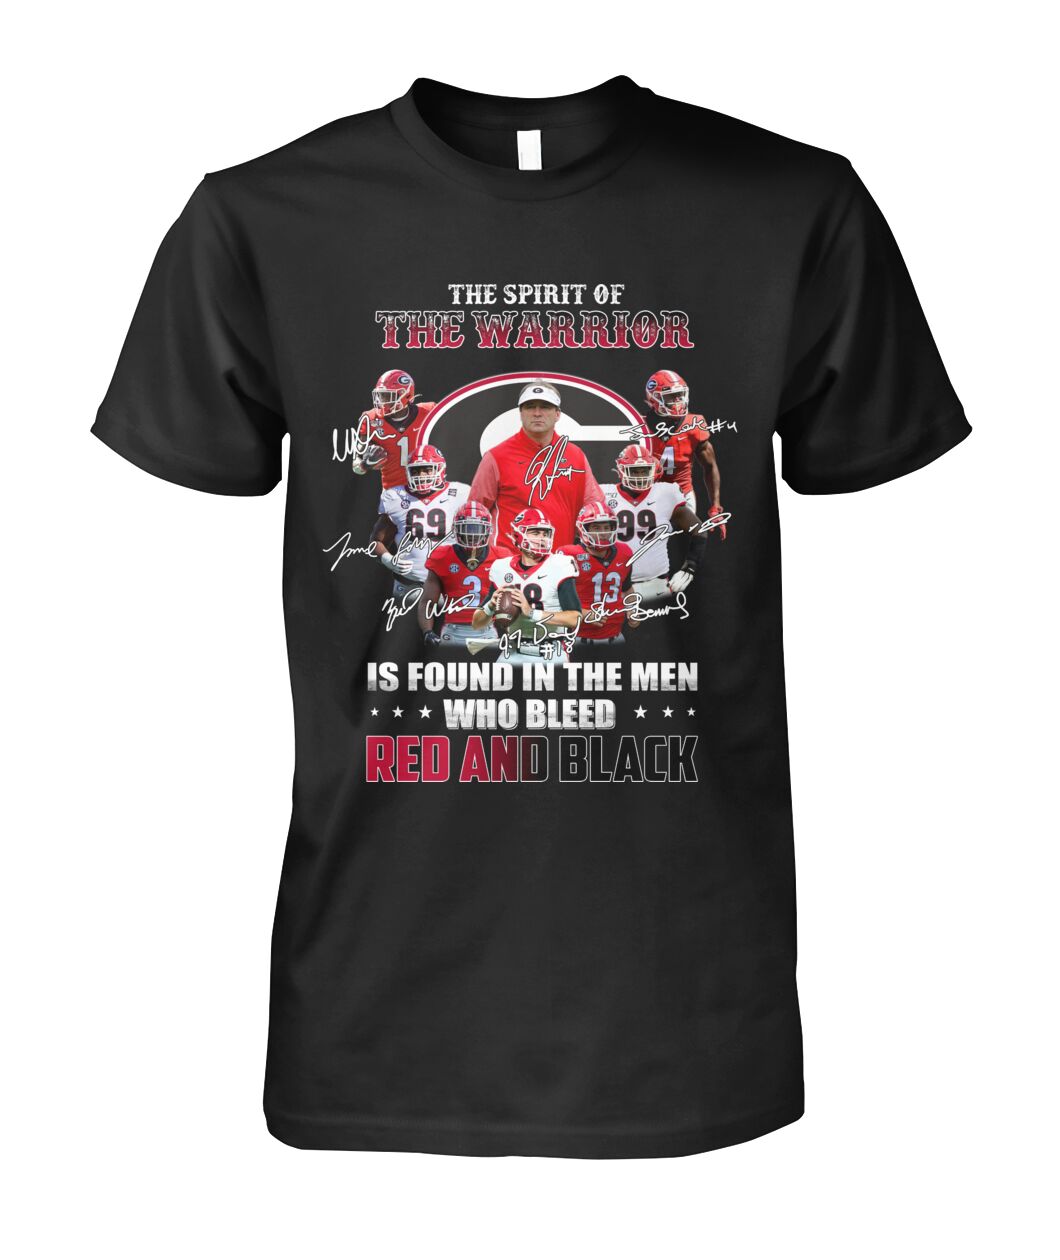 The spirit of the Warrior is found in the men who bleed red and black shirt and v-neck